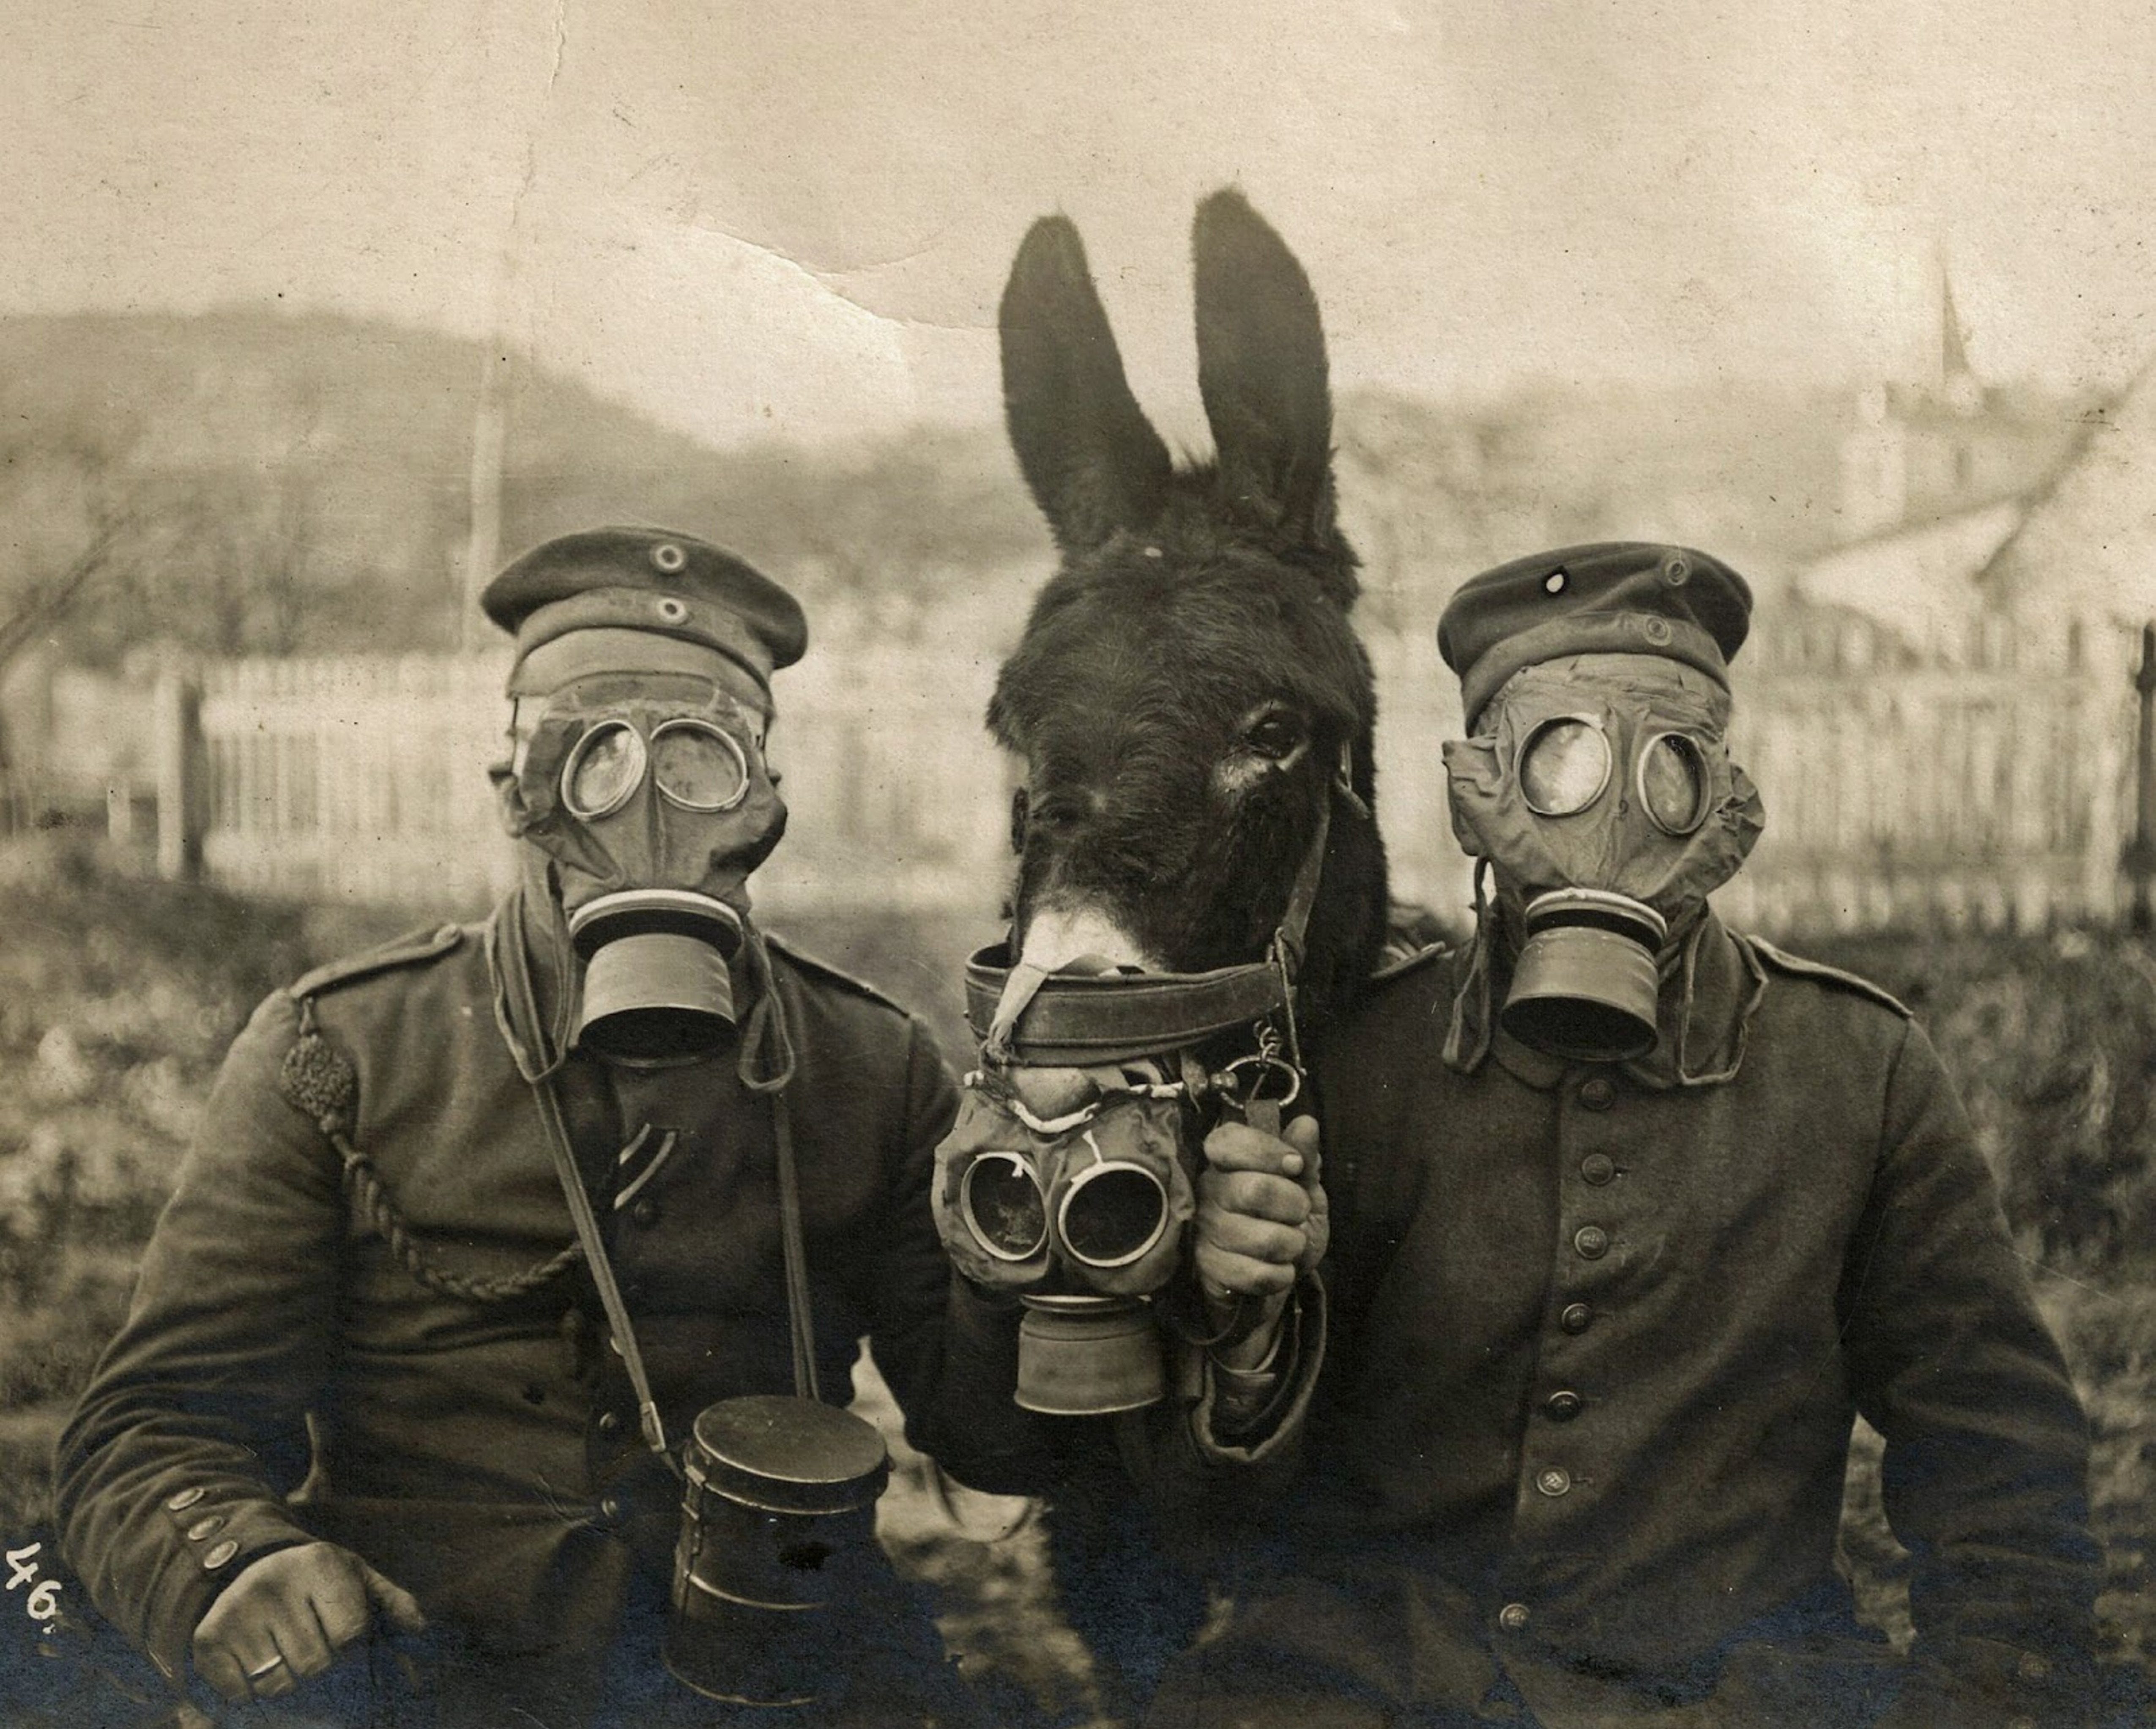 These harrowing of children and troops in gas masks show the terror of WWI | by Rian Dundon | Timeline